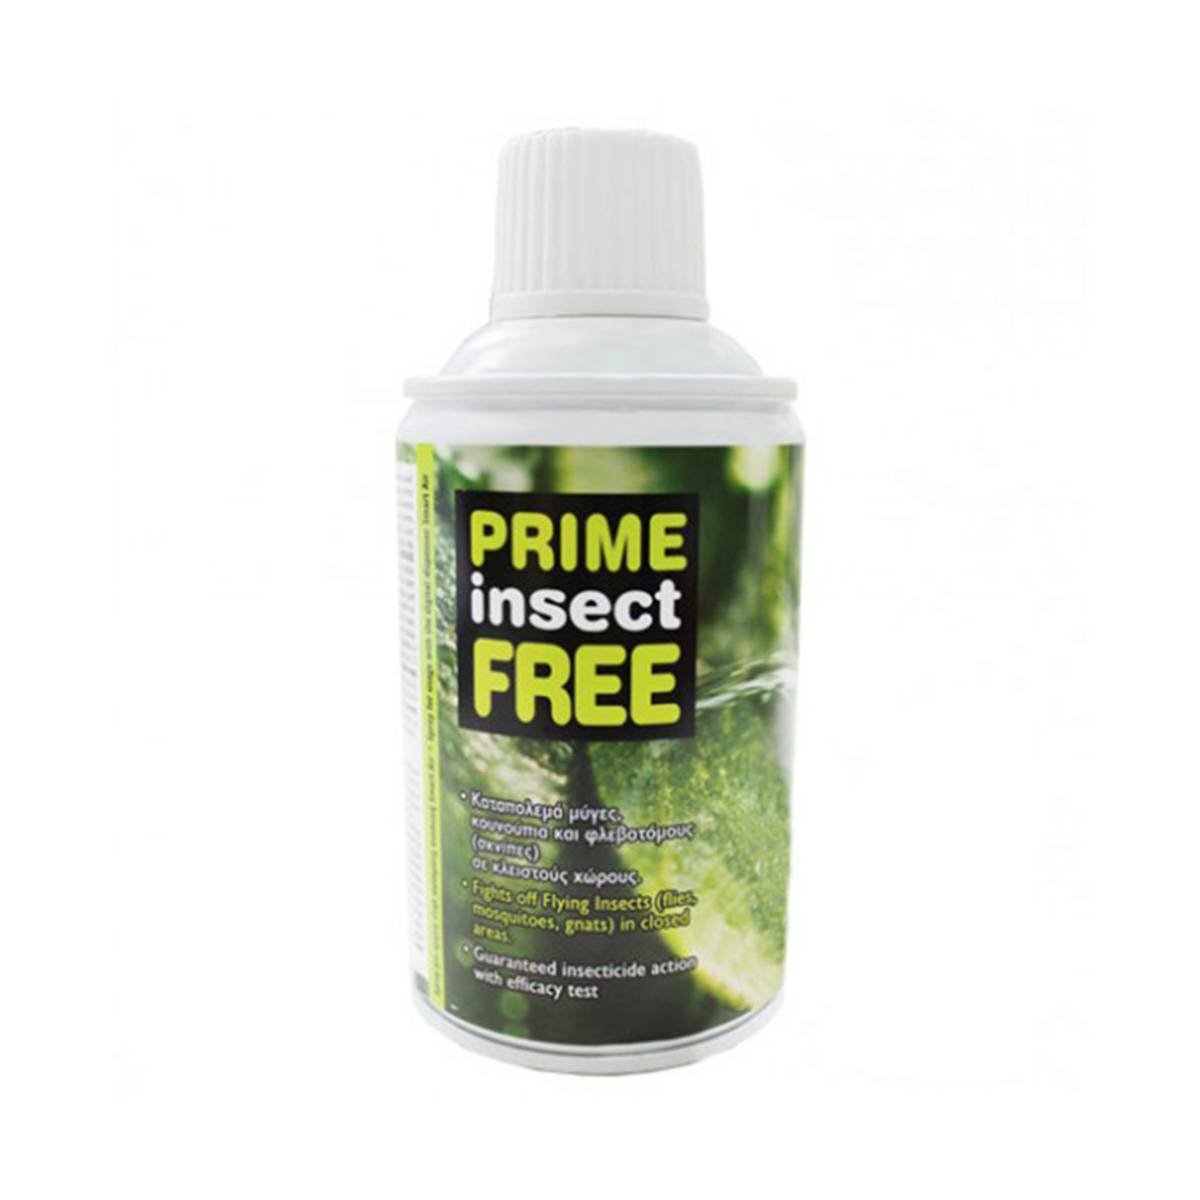 Знищувач комах PRIME INSECT FREE 250мл, Греція PRIME INSECT-FREE Spring Air